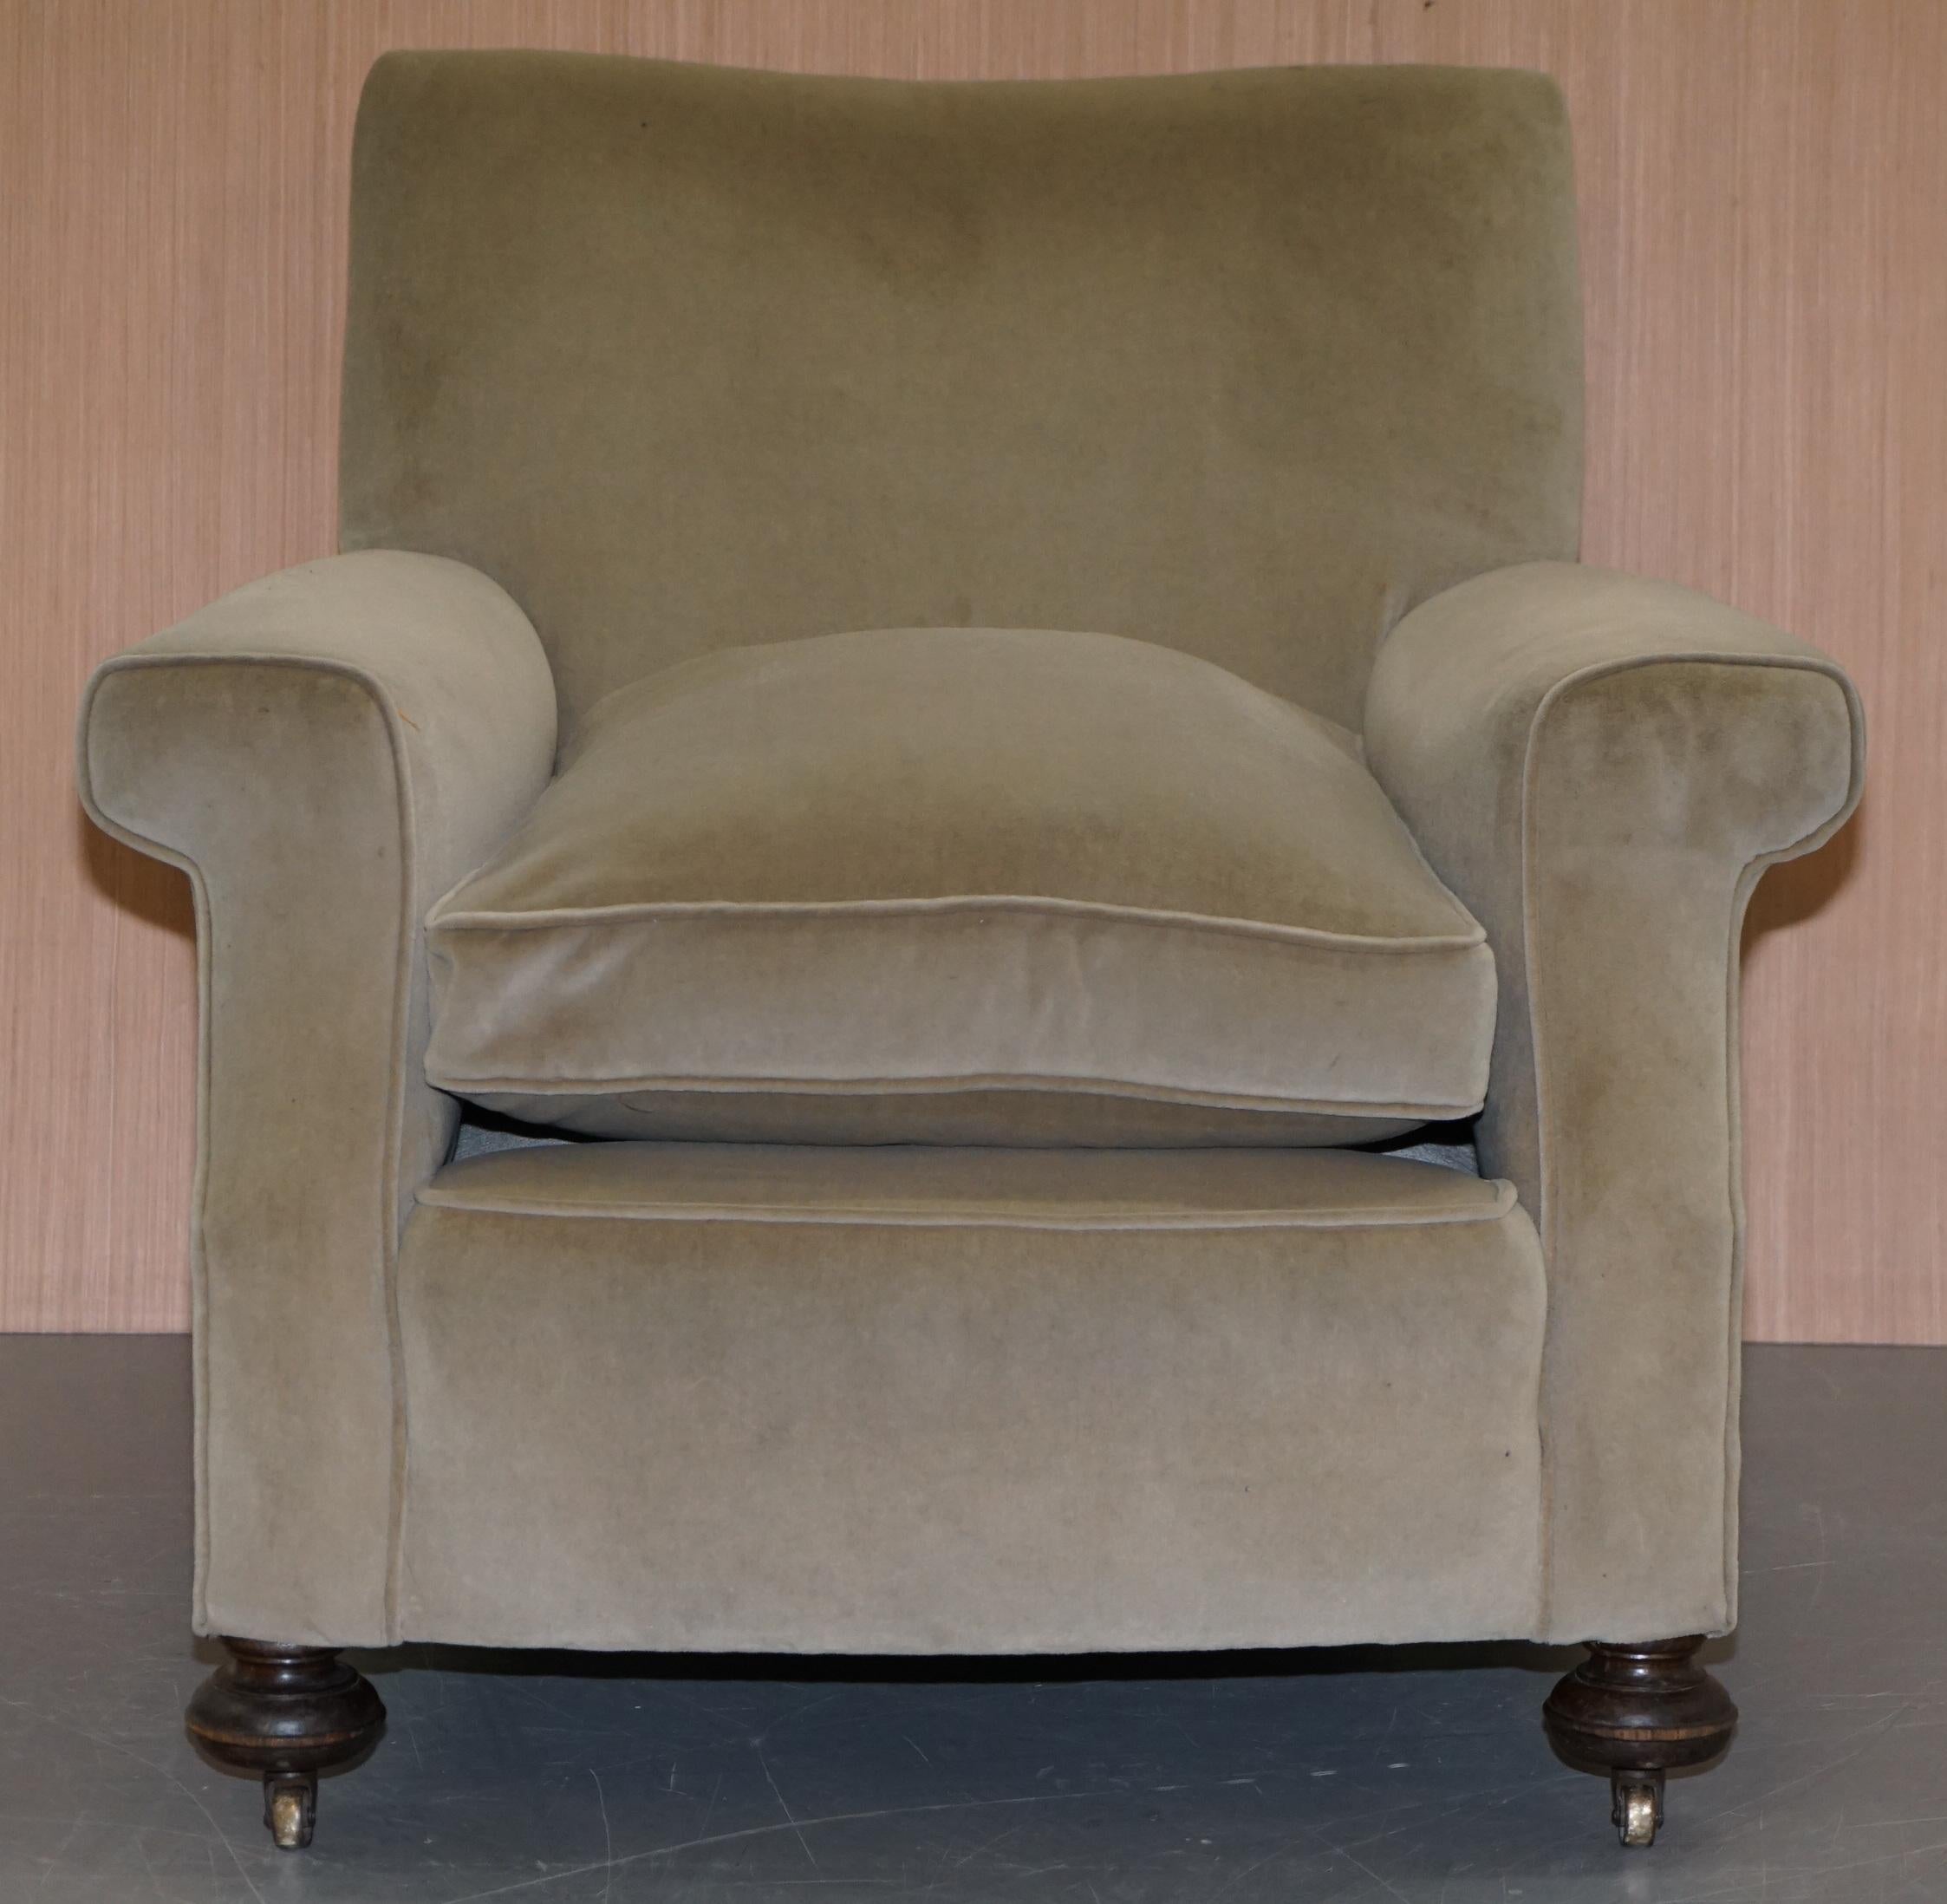 We are delighted to offer for sale this lovely and very comfortable gentleman’s club armchair with stamped inside back leg

A very good looking and well made club armchair, stamped to the inside back leg 1658 I think it is which is most likely an